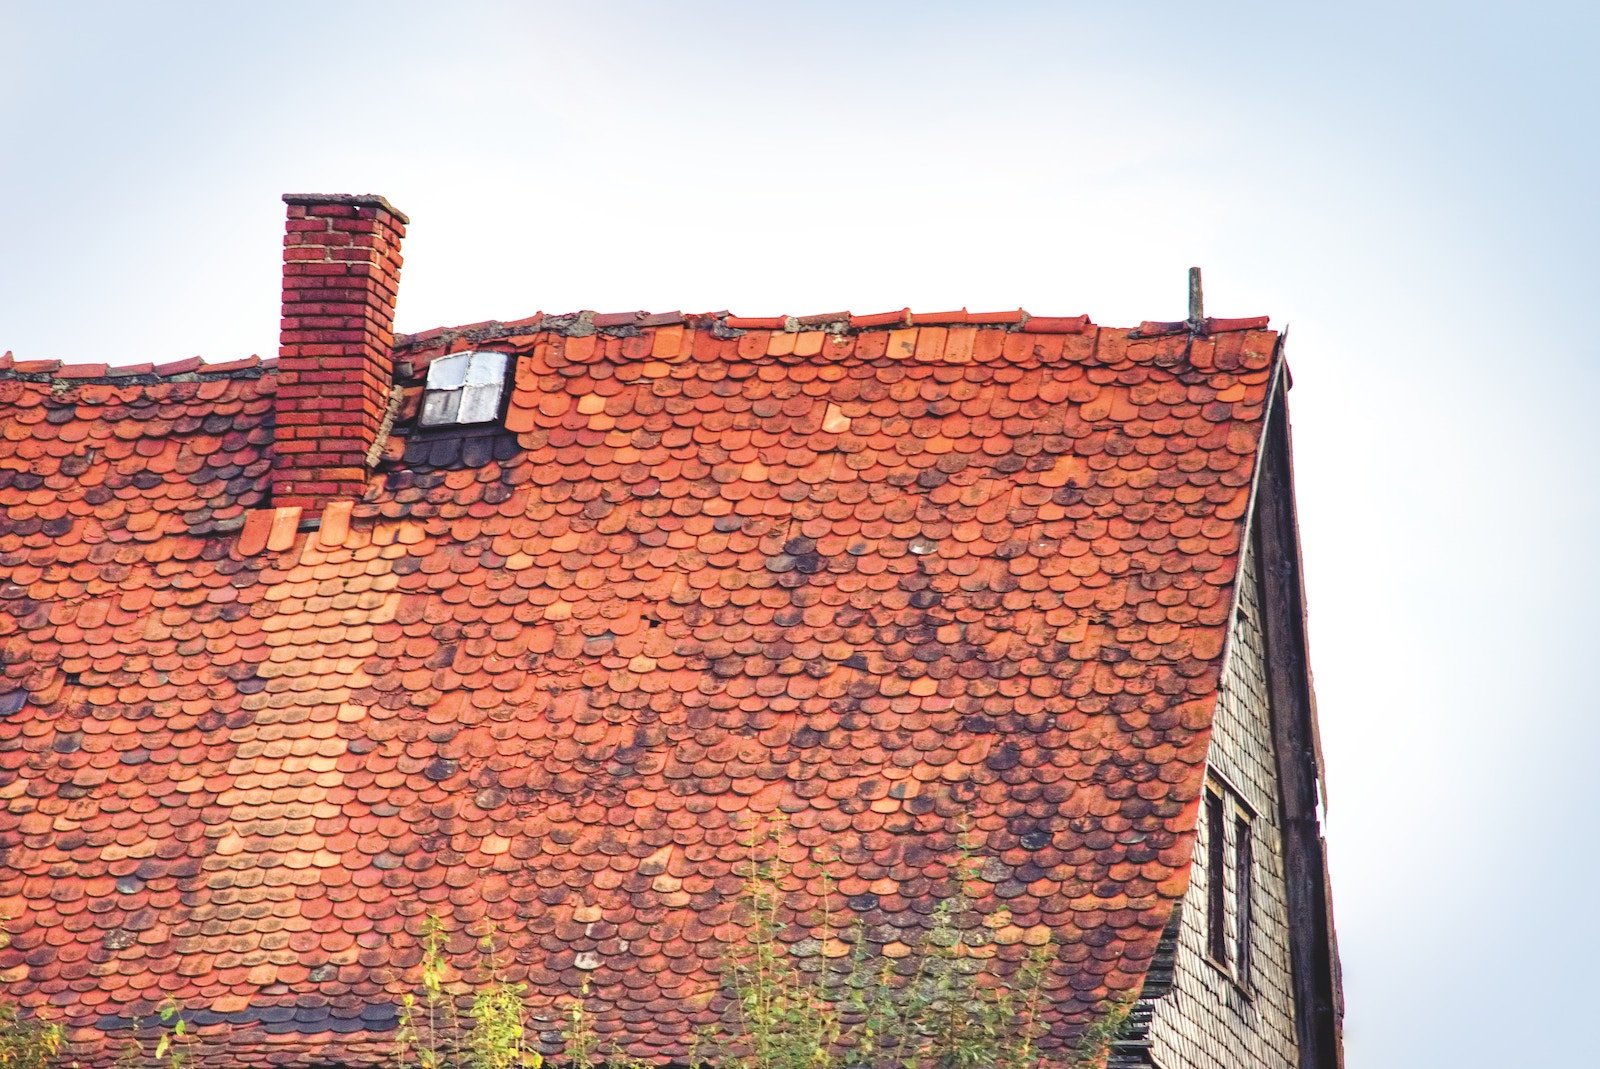 Make sure to stay on top of your roof maintenance checklist so you catch problems early.